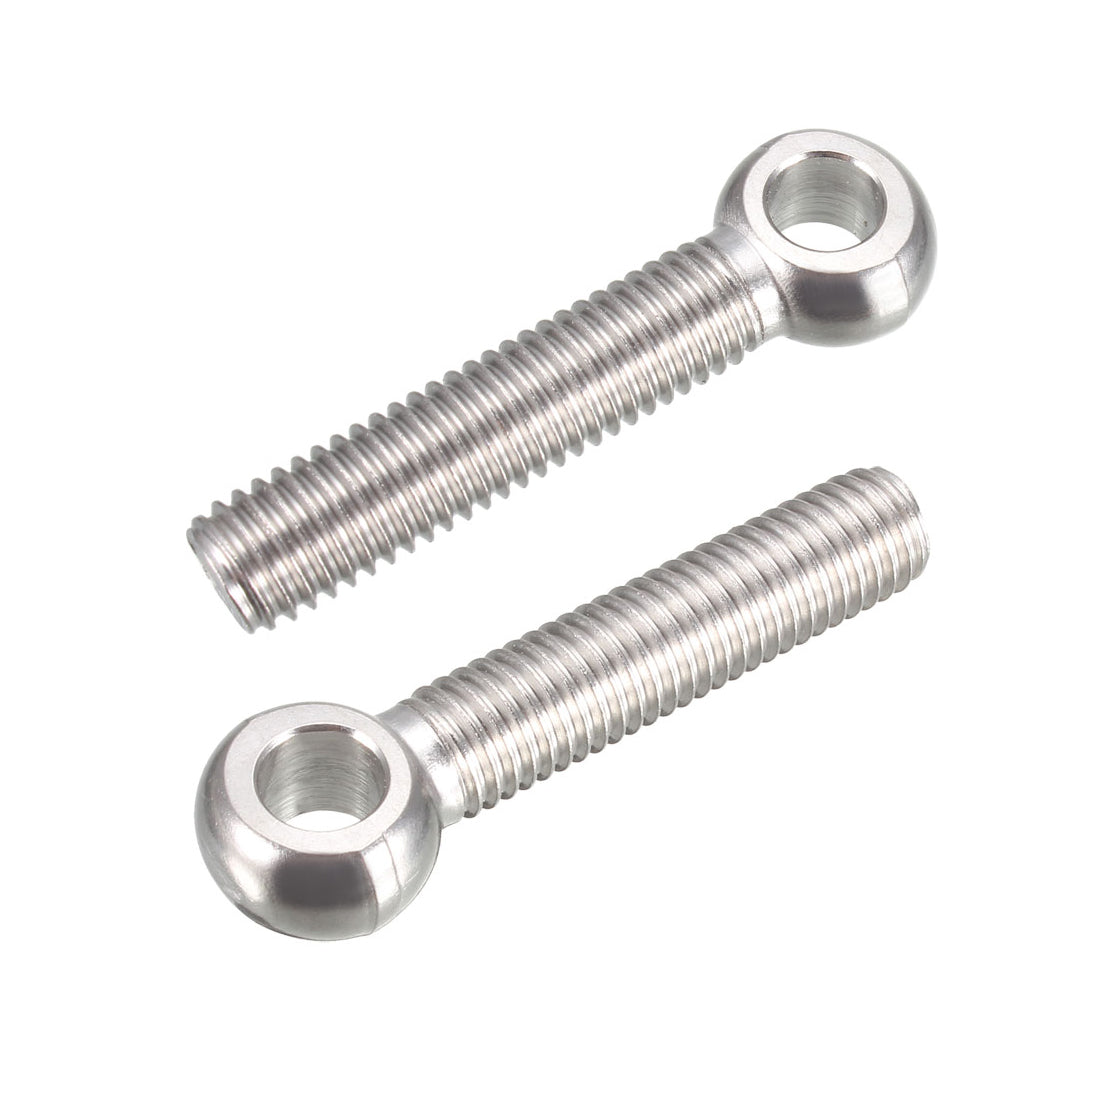 uxcell Uxcell M10 x 50mm Machinery Shoulder Swing Lifting Eye Bolt 304 Stainless Steel Metric Thread 2pcs